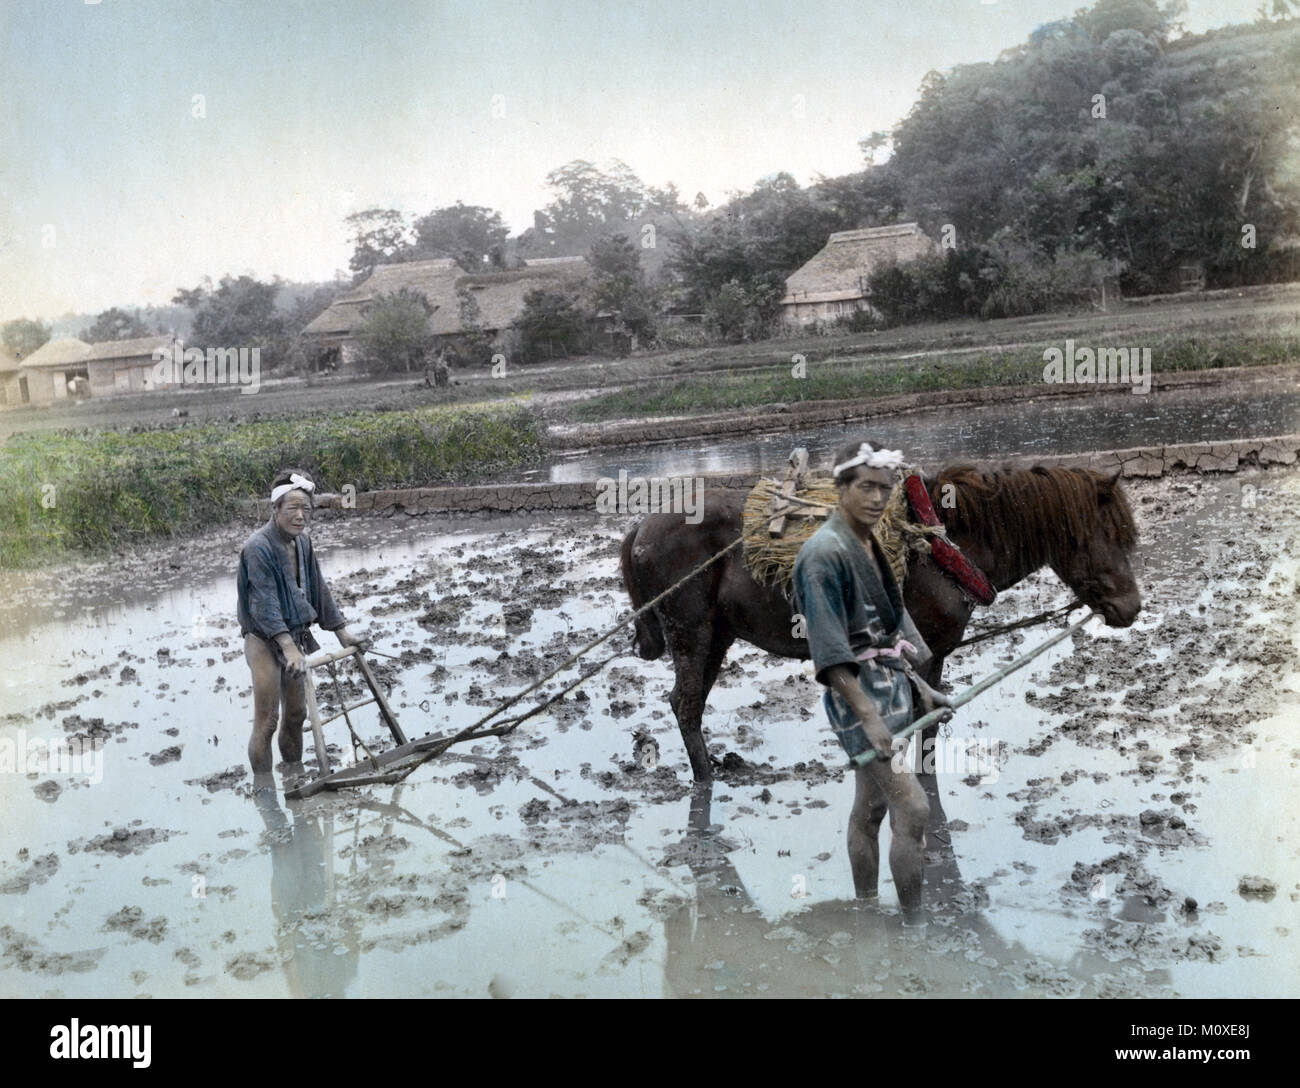 Farmers ploughing a rice paddy field with a horse, Japan, c.1880's Stock Photo